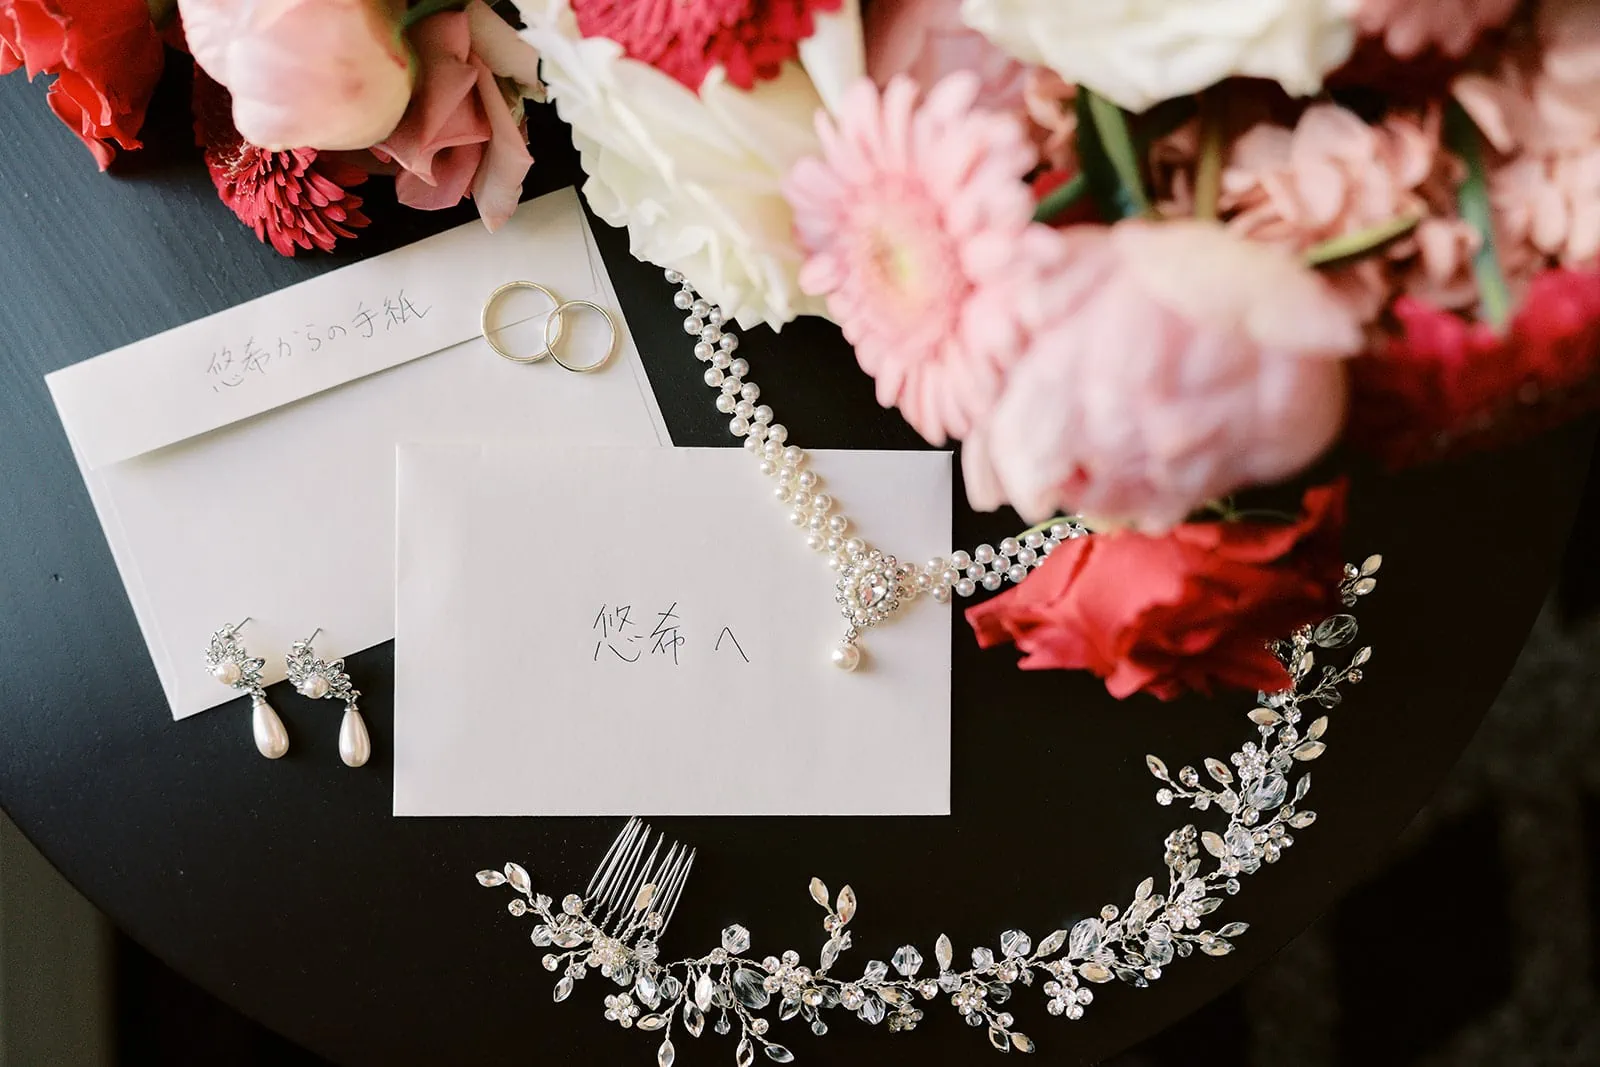 Queenstown Elopement Heli Wedding Photographer クイーンズタウン結婚式 | A bouquet of flowers and jewelry, belonging to Ayaka, sits on a table.